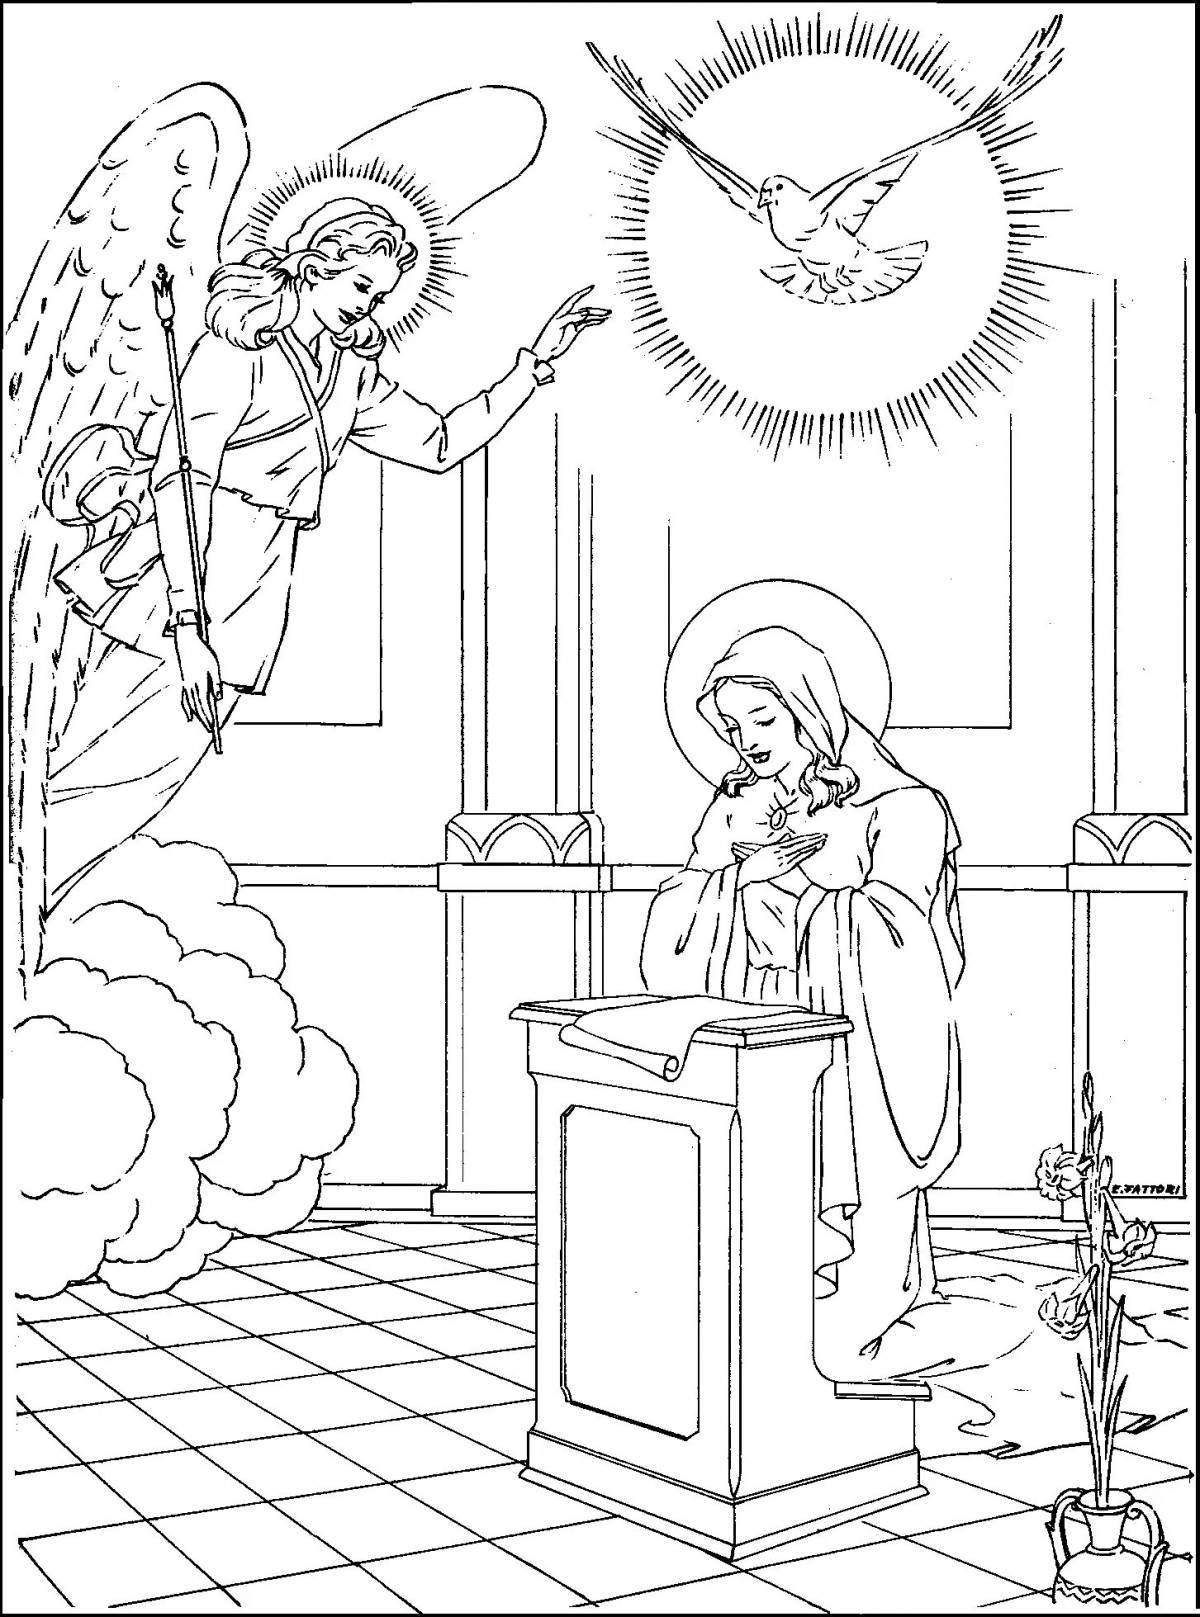 Coloring page violent orthodox holiday